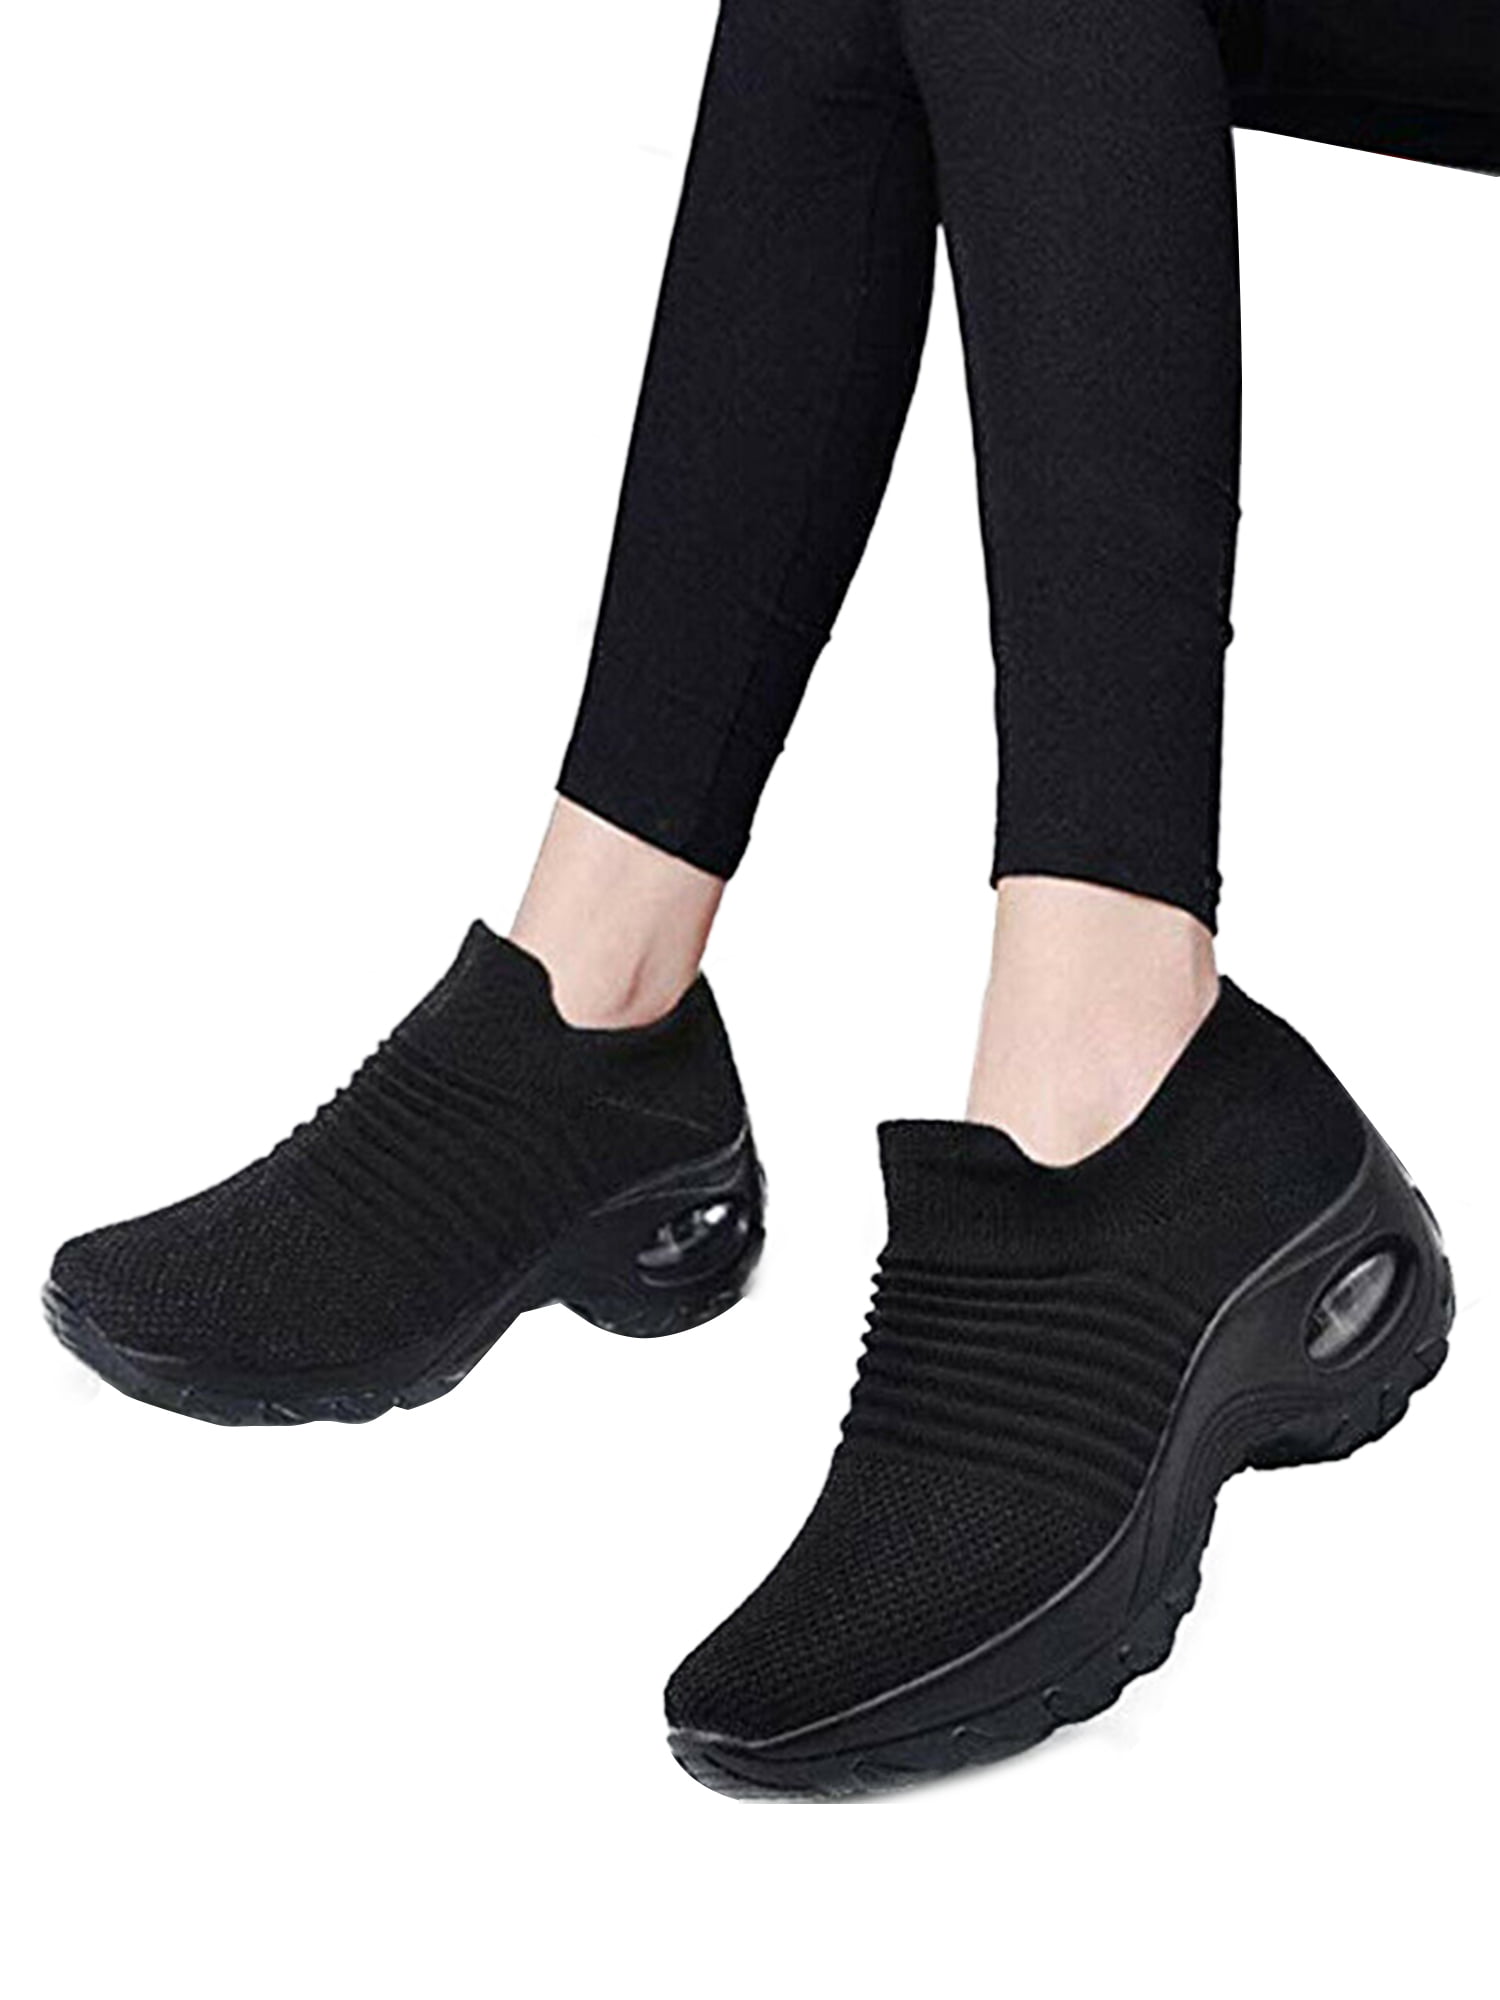 Women's Air-Cushion Sport Running Shoes Breathable Mesh Walking Slip-On Sneakers